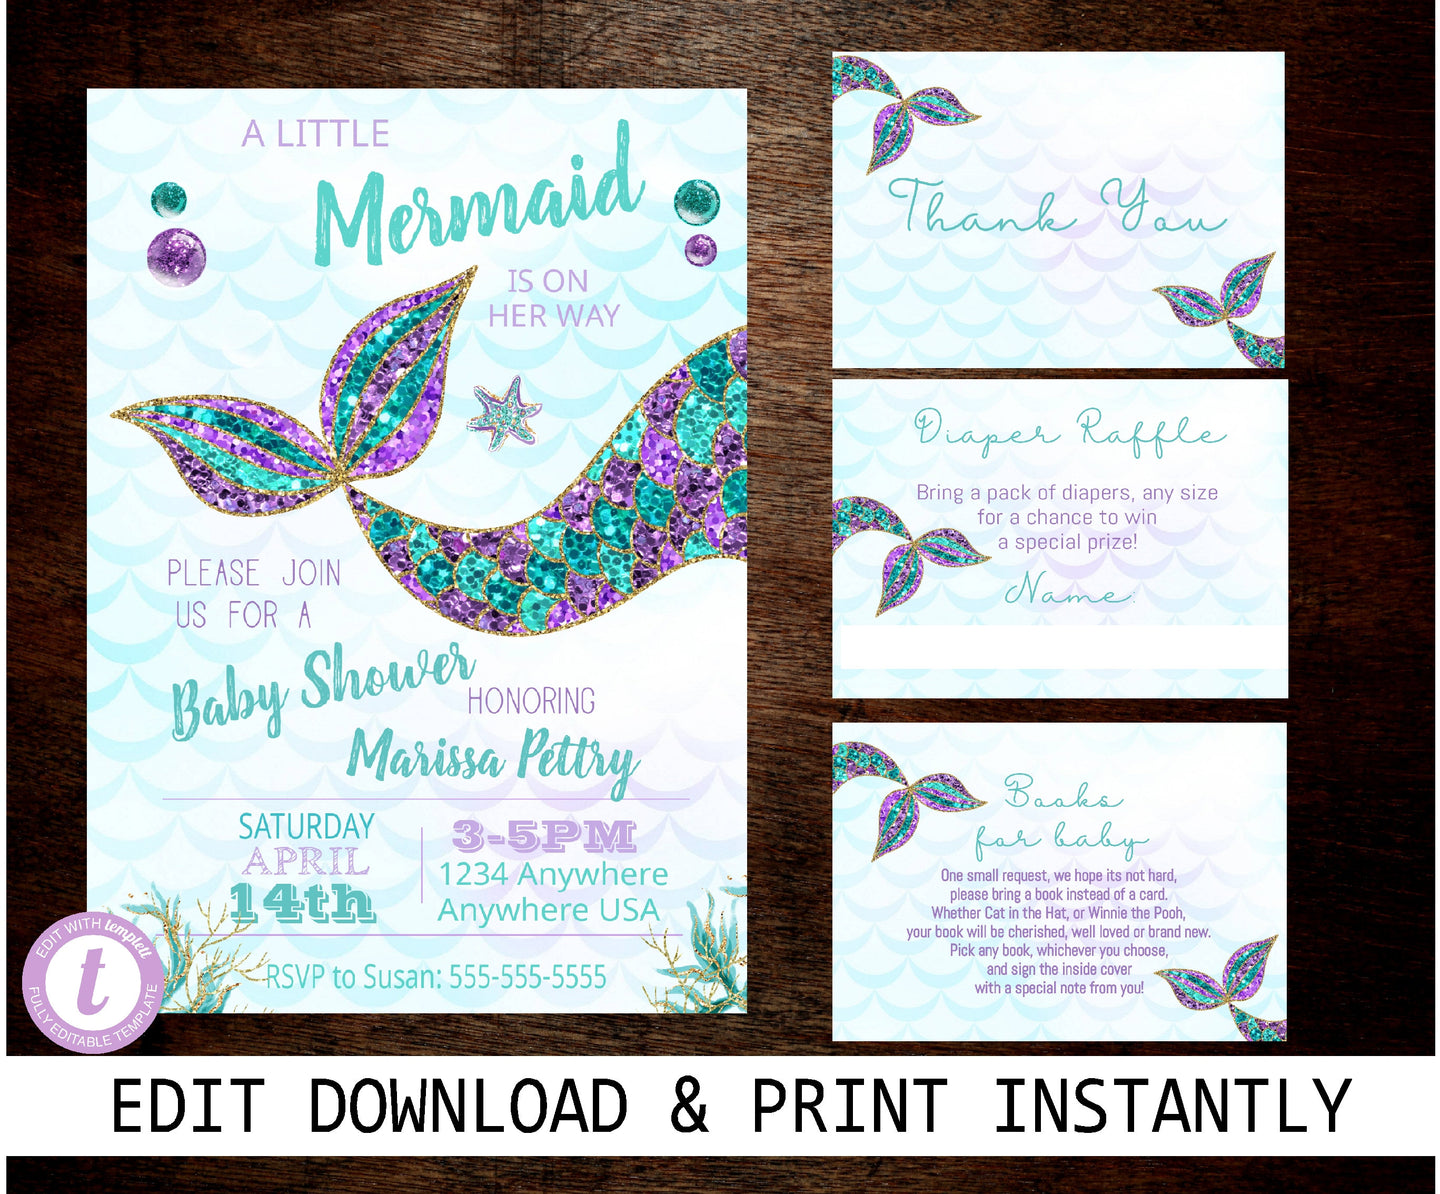 Mermaid Baby Shower Bundle Invitation, Mermaid Party books for baby, Thank you, Diaper Raffle, Little Mermaid Is On Her Way, Shower Invite